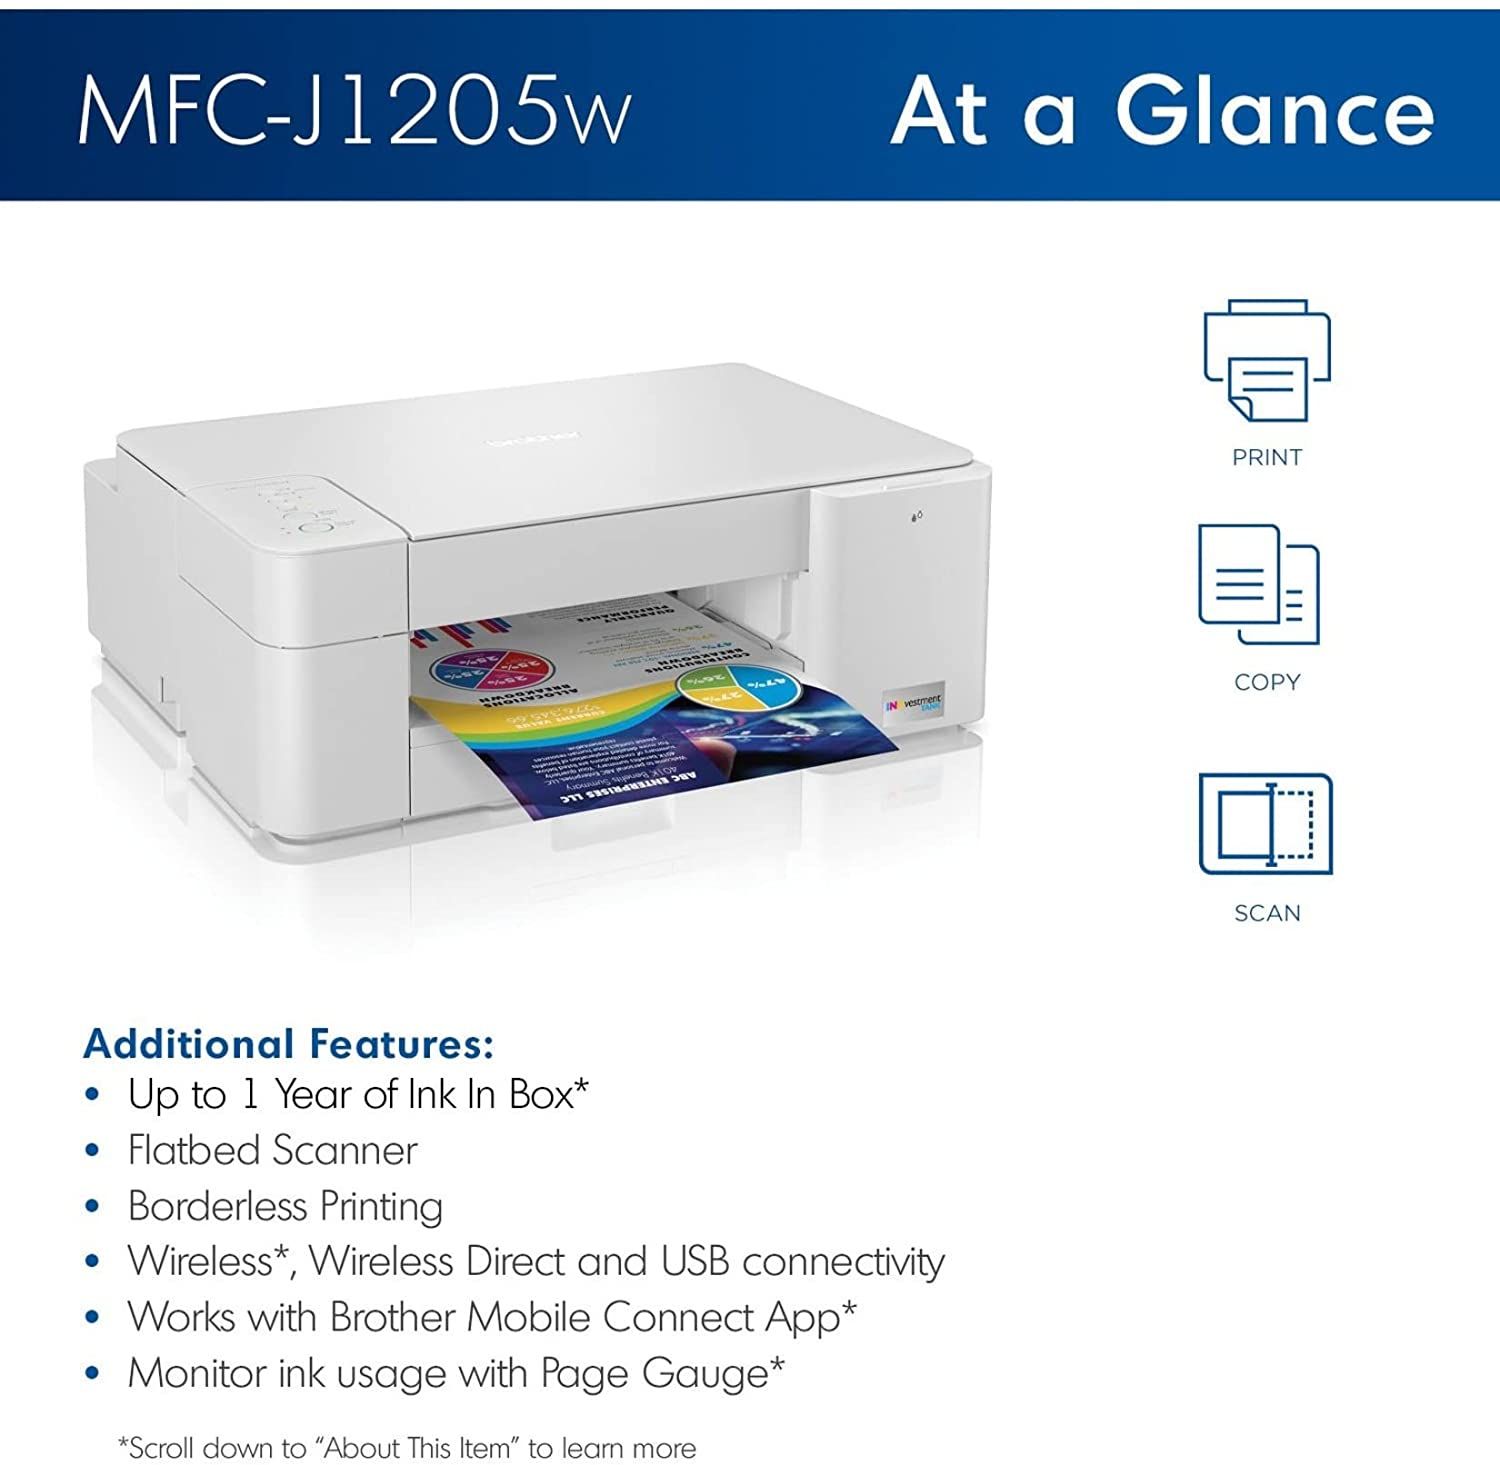 Brother MFC-J1205W Wireless Color Inkjet printer features